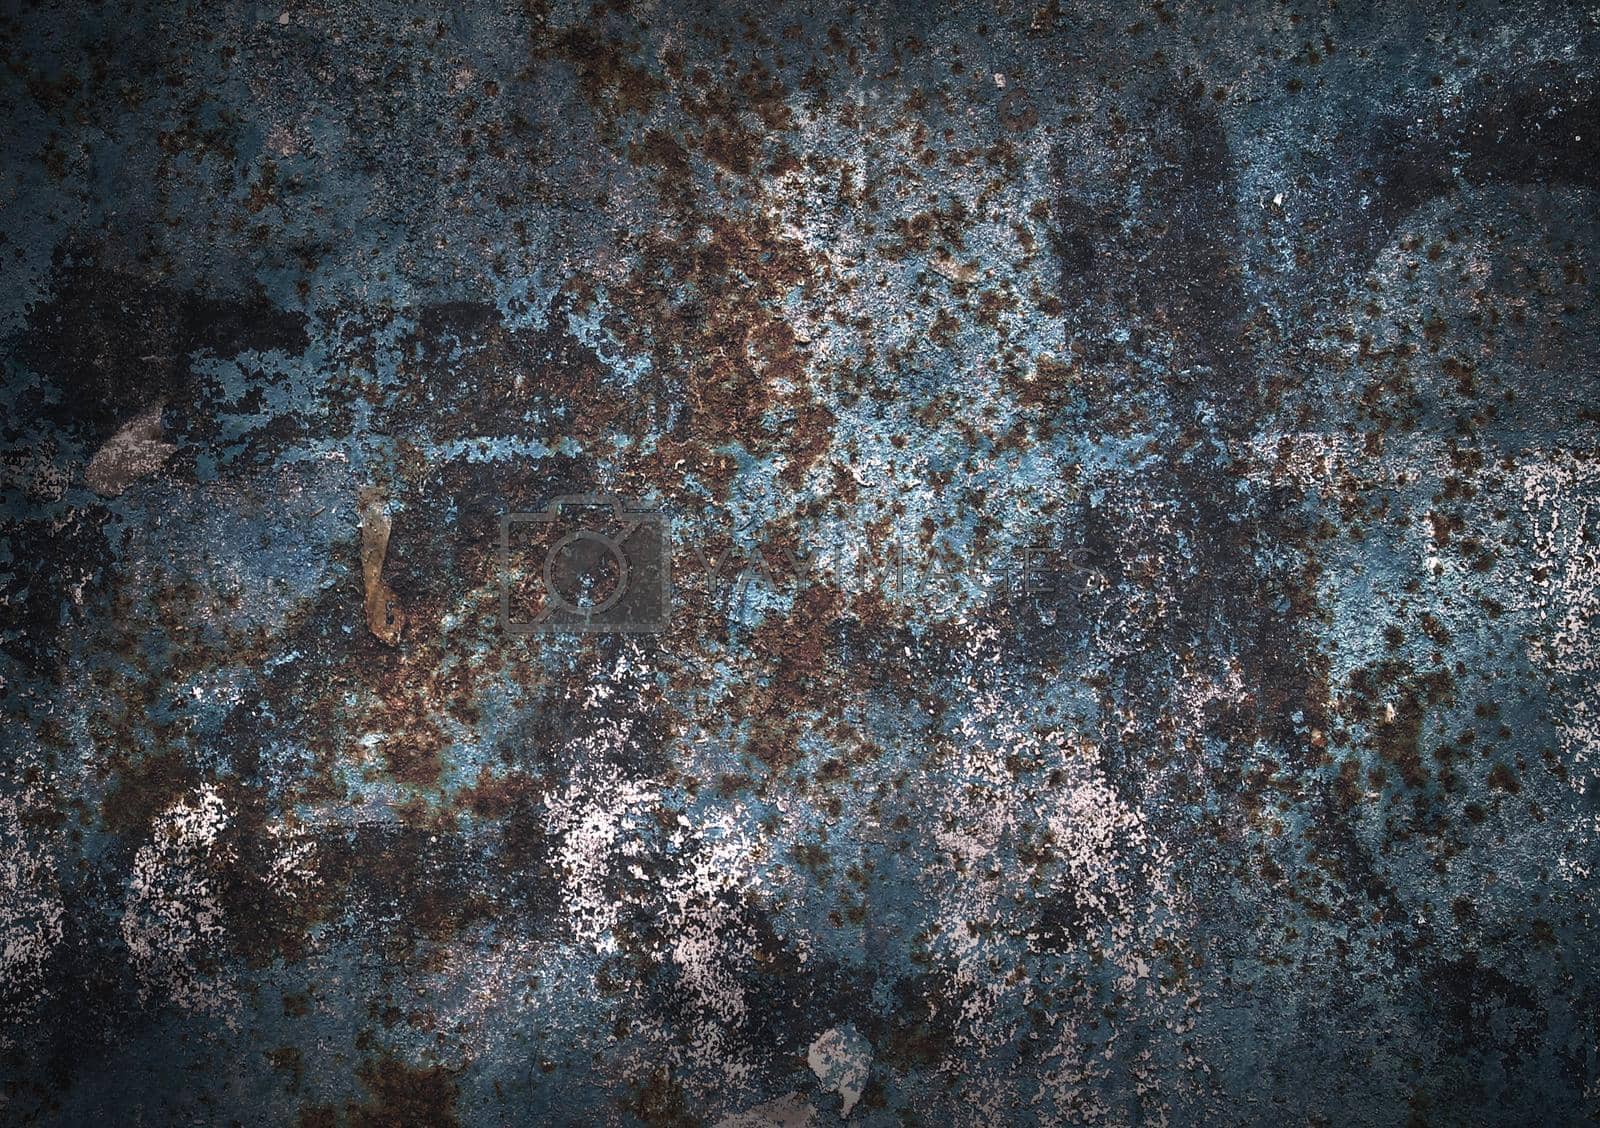 Royalty free image of Detailed close up surface of rusty metal and steel with lots of corrosion in high resolution by MP_foto71